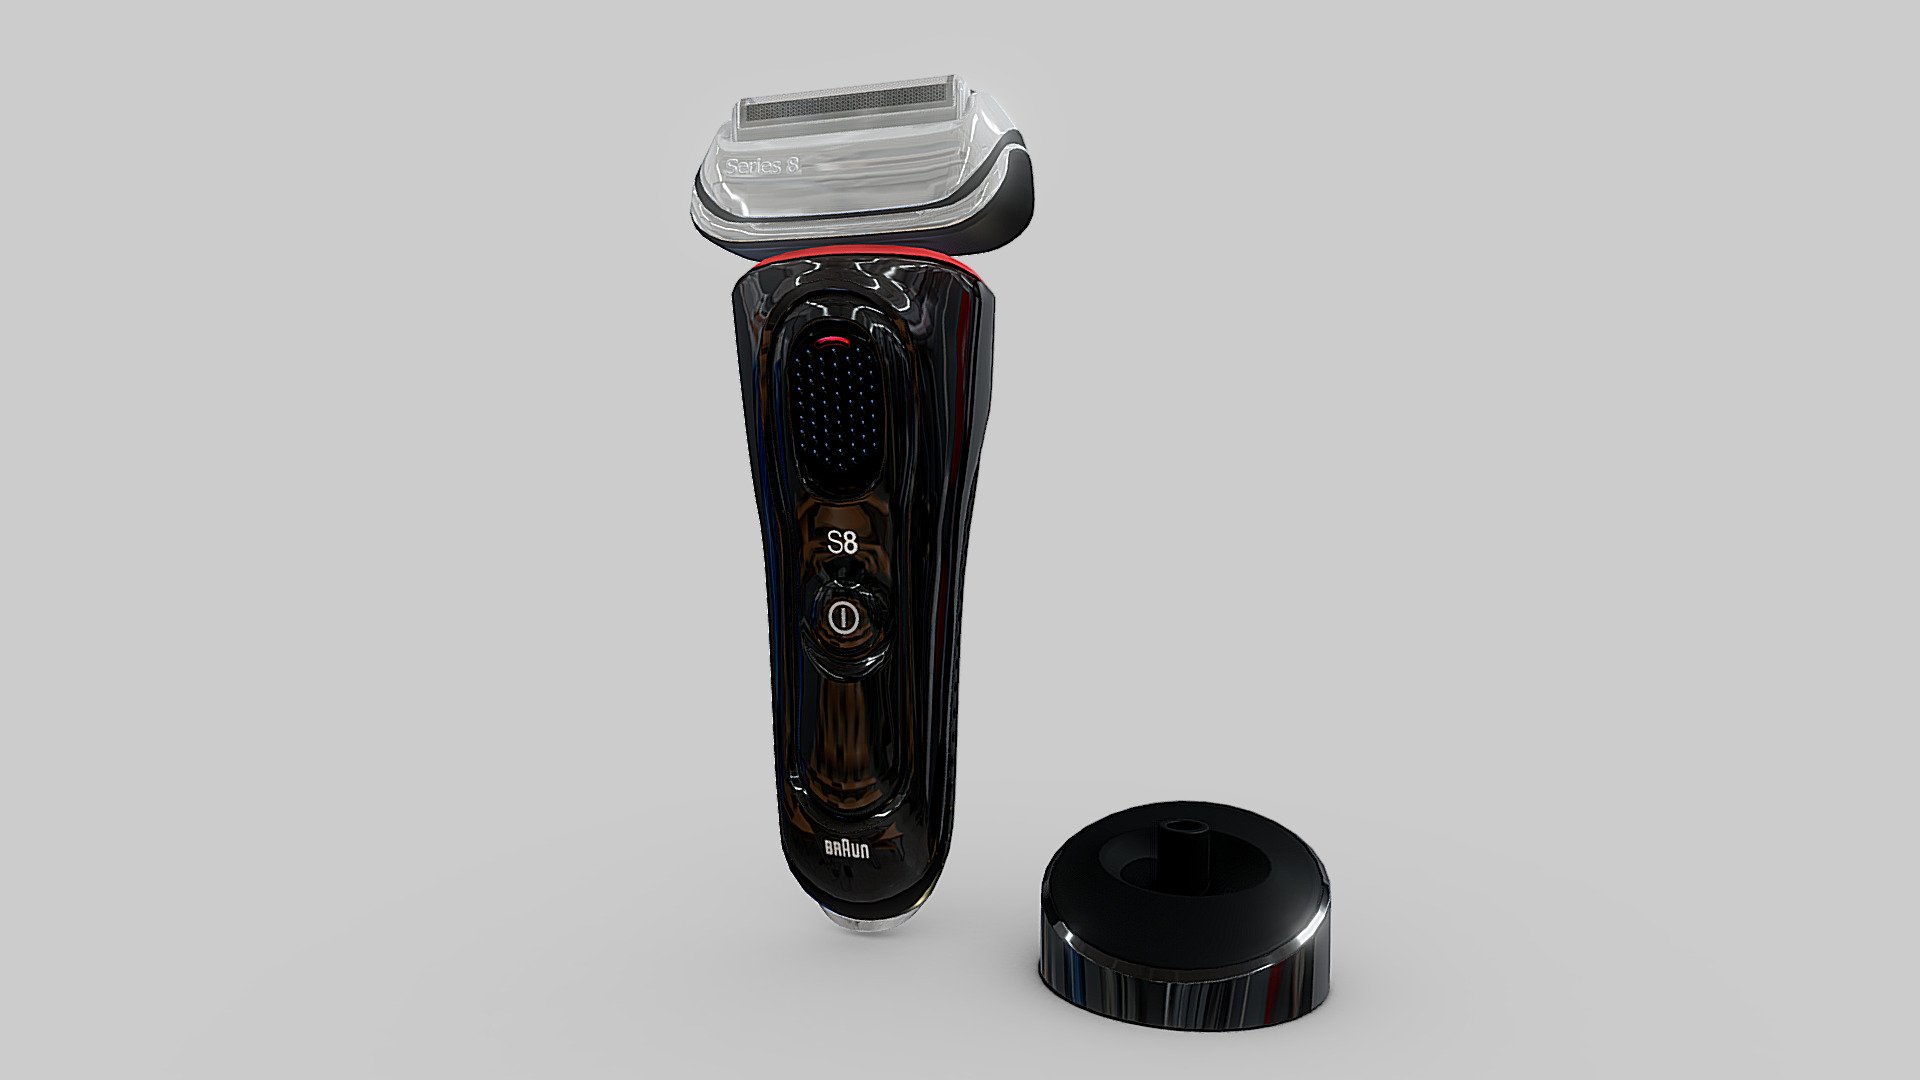 can be used in archviz or for game

Scale: 1:1

Model has been enhanced with sketchfab post processing, but all textures &amp; normal maps included in the FBX - Braun Shaver Series-8 - Buy Royalty Free 3D model by OGL (@GaryLim) 3d model